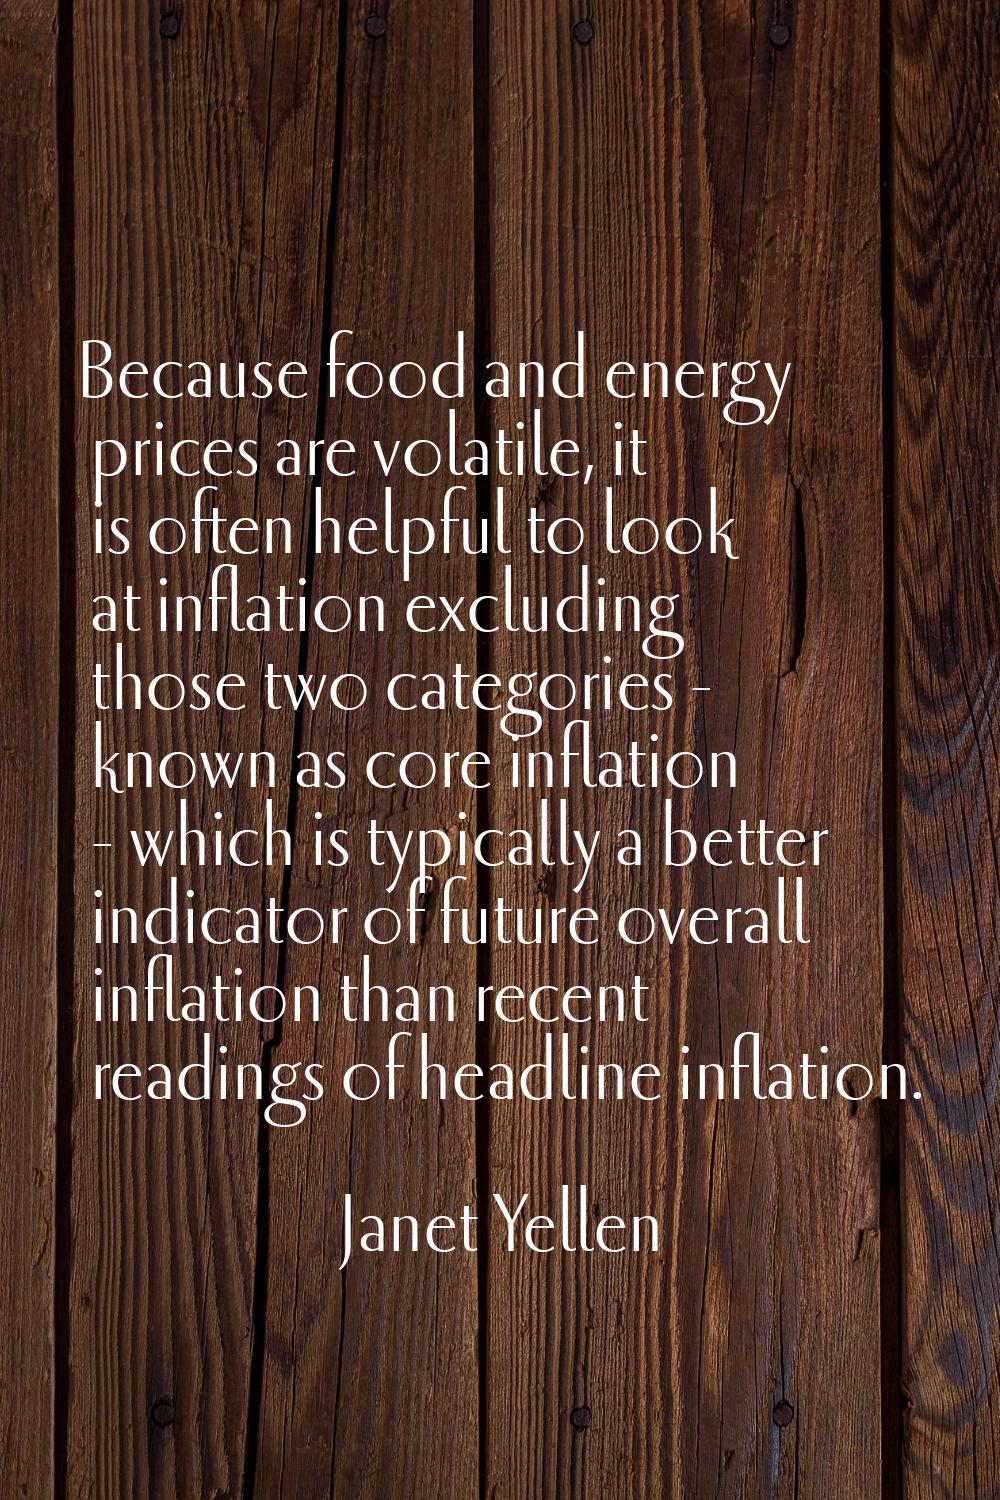 Because food and energy prices are volatile, it is often helpful to look at inflation excluding tho